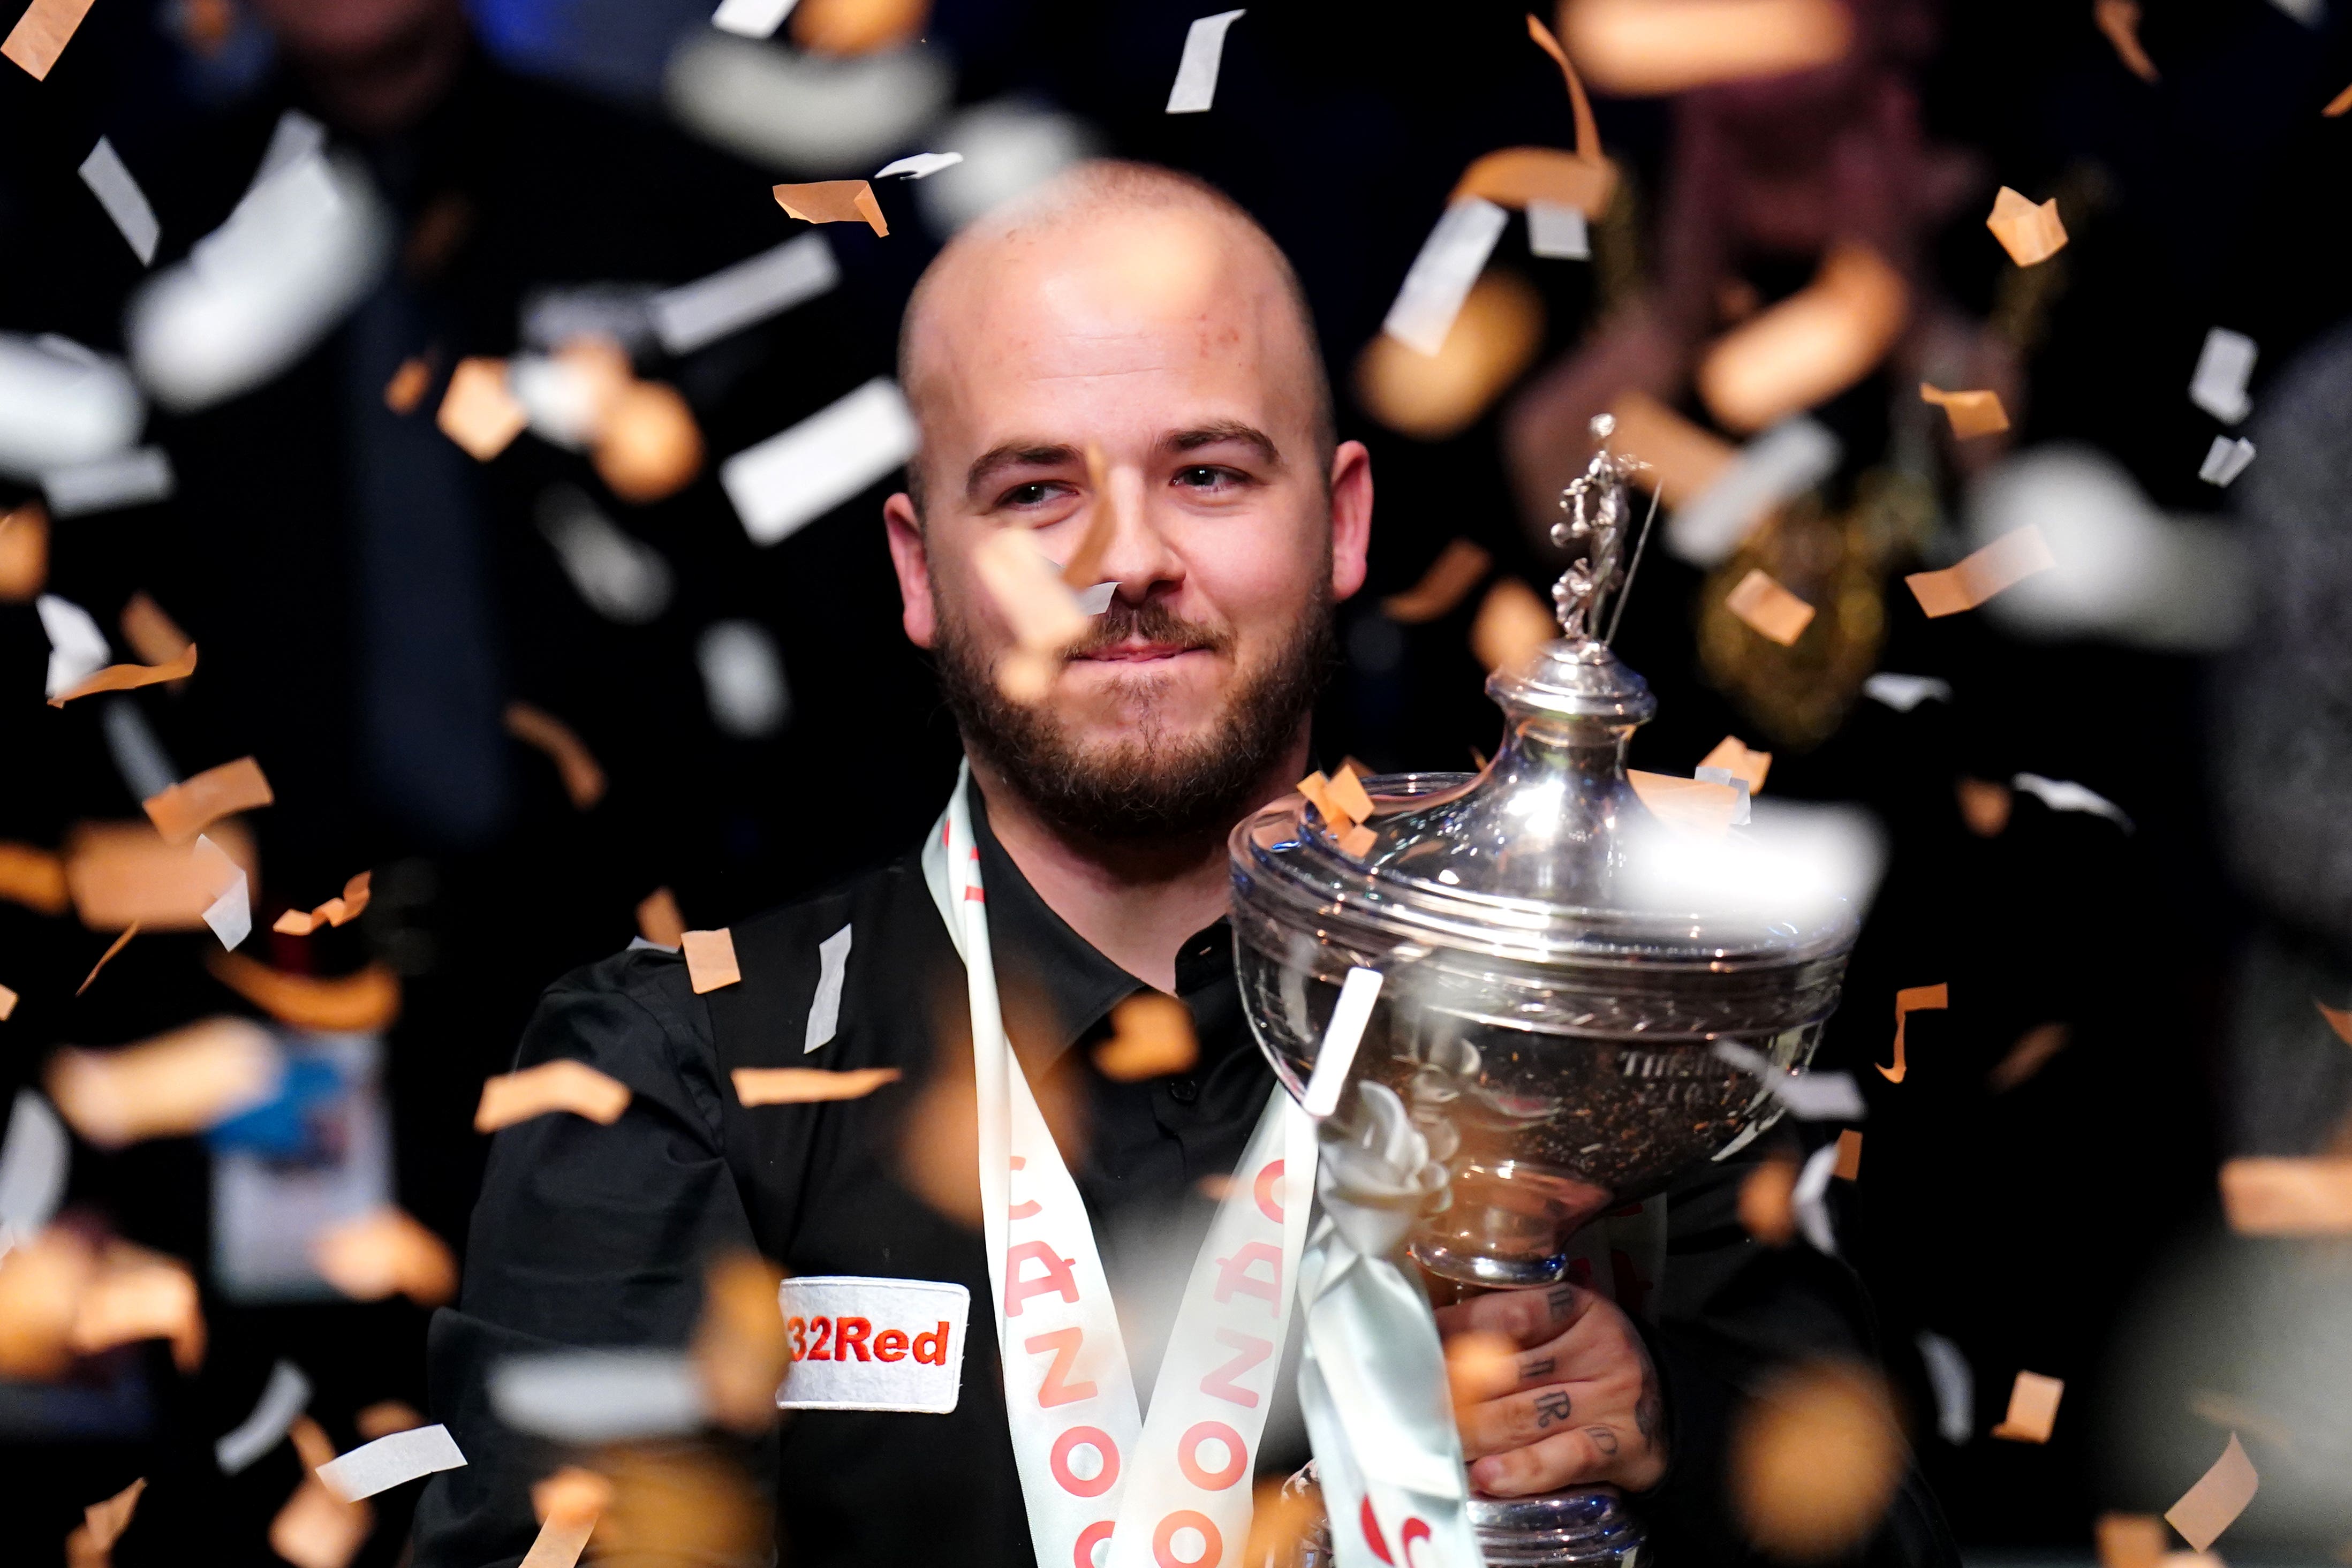 Luca Brecel is set to lead a new generation of snooker stars (Zac Goodwin/PA)